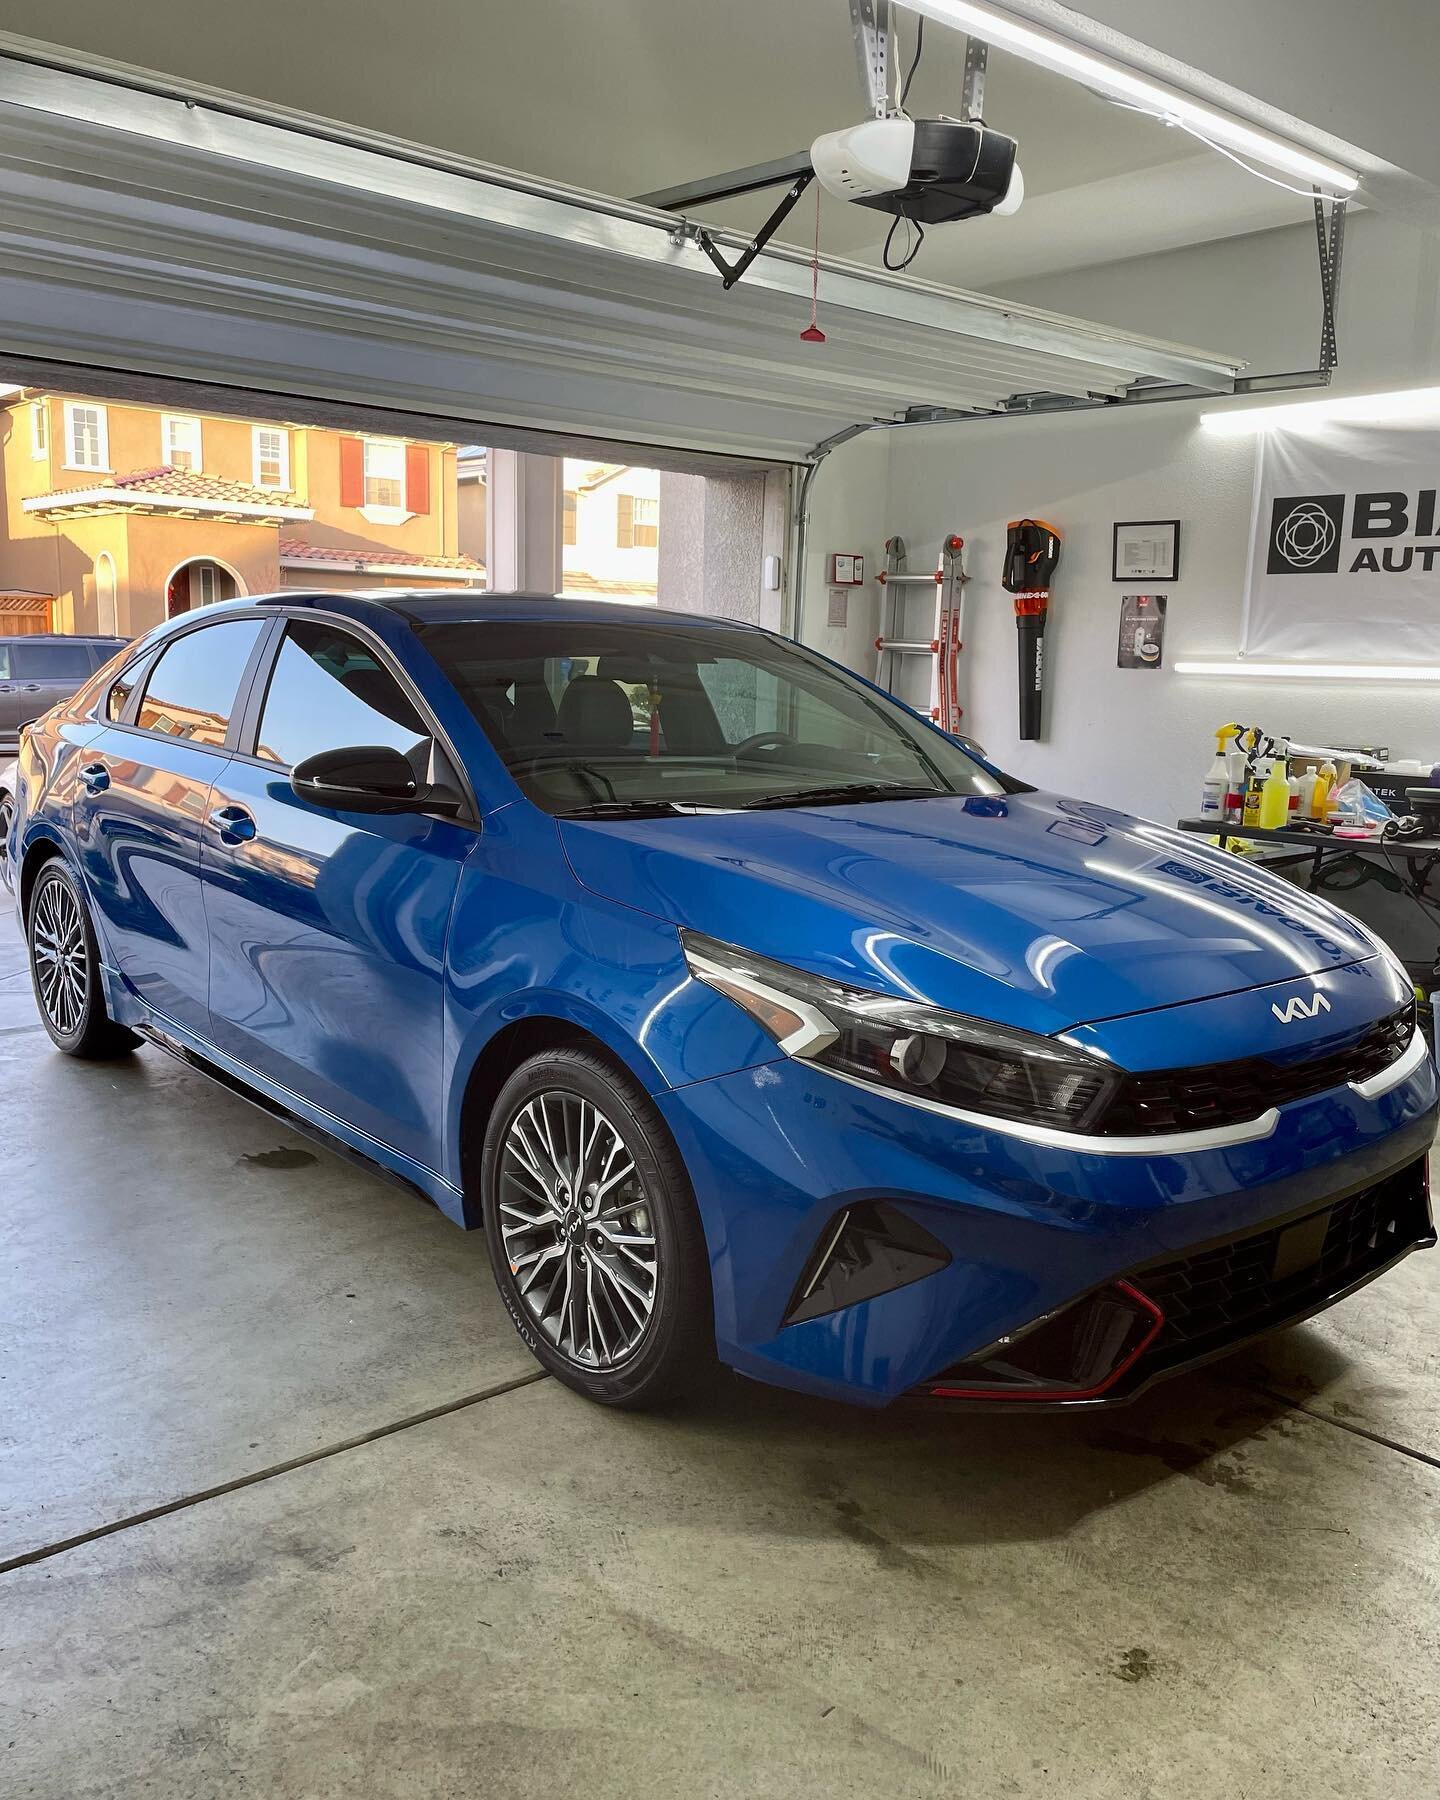 Kia Forte GT Line in for some paint protection! We performed a Full Front PPF &amp; a 1 Year Ceramic Coat on this brand new vehicle. This is a good investment for the client as the paint will be preserved for miles to come. &thinsp;&thinsp;
&thinsp;&